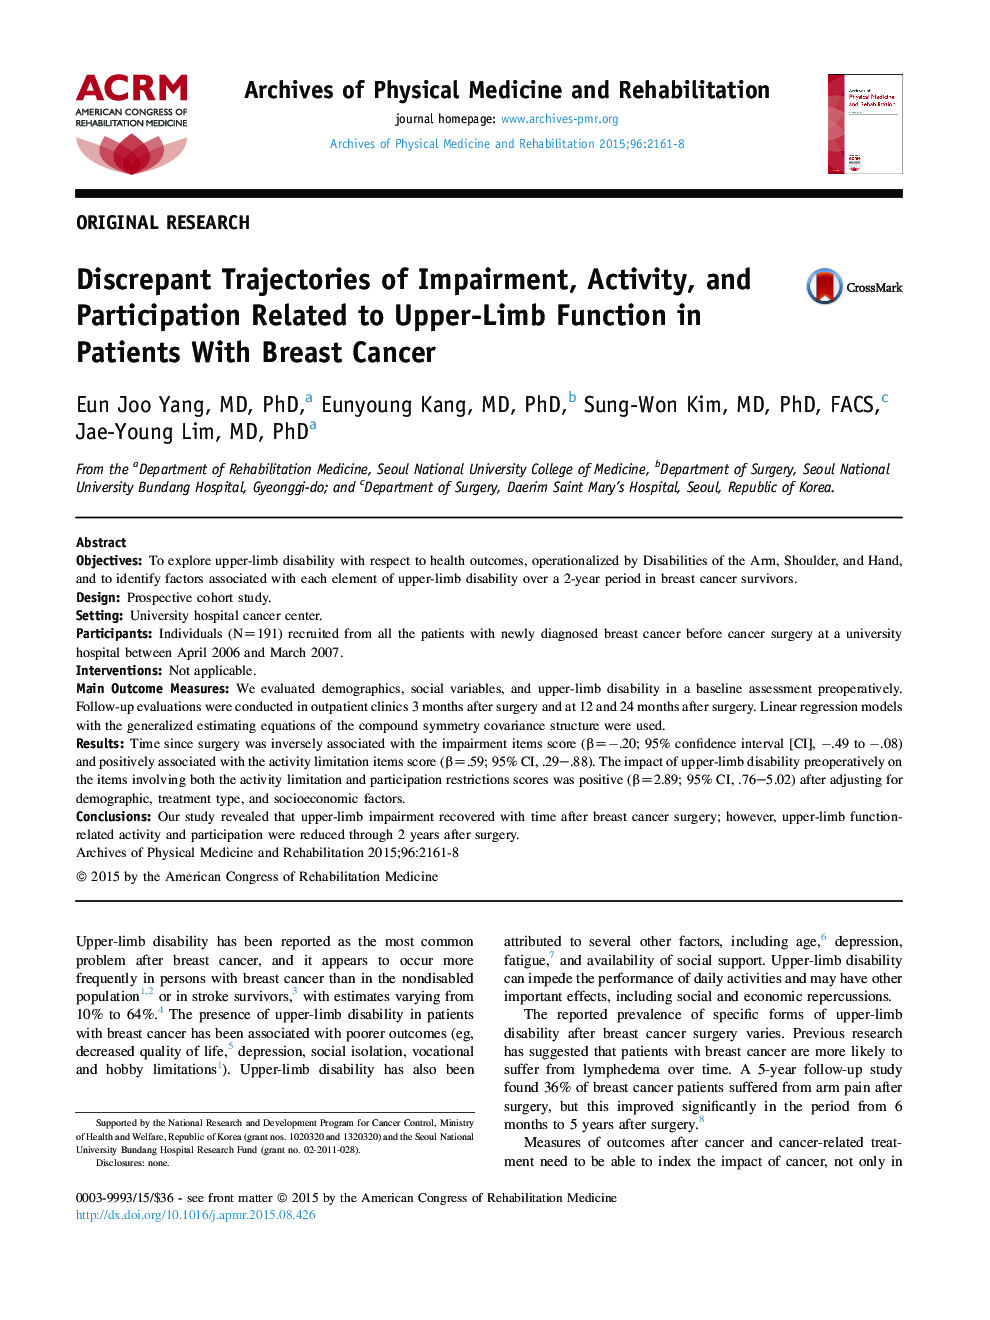 Discrepant Trajectories of Impairment, Activity, and Participation Related to Upper-Limb Function in Patients With Breast Cancer 